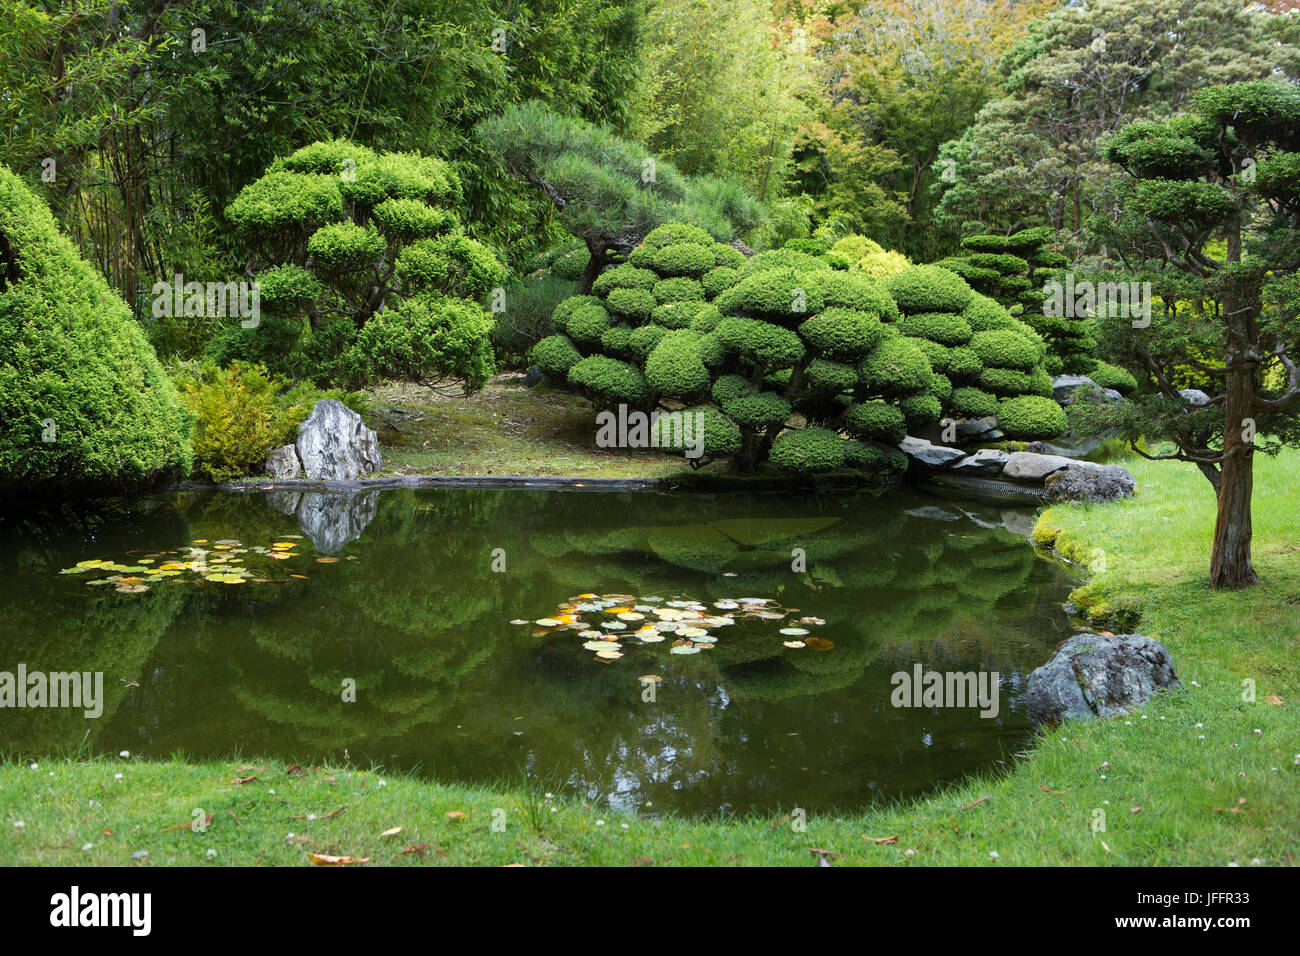 A scenic view of a pond, and artfully sculpted trees in San Francisco's Japanese Tea Garden. Stock Photo